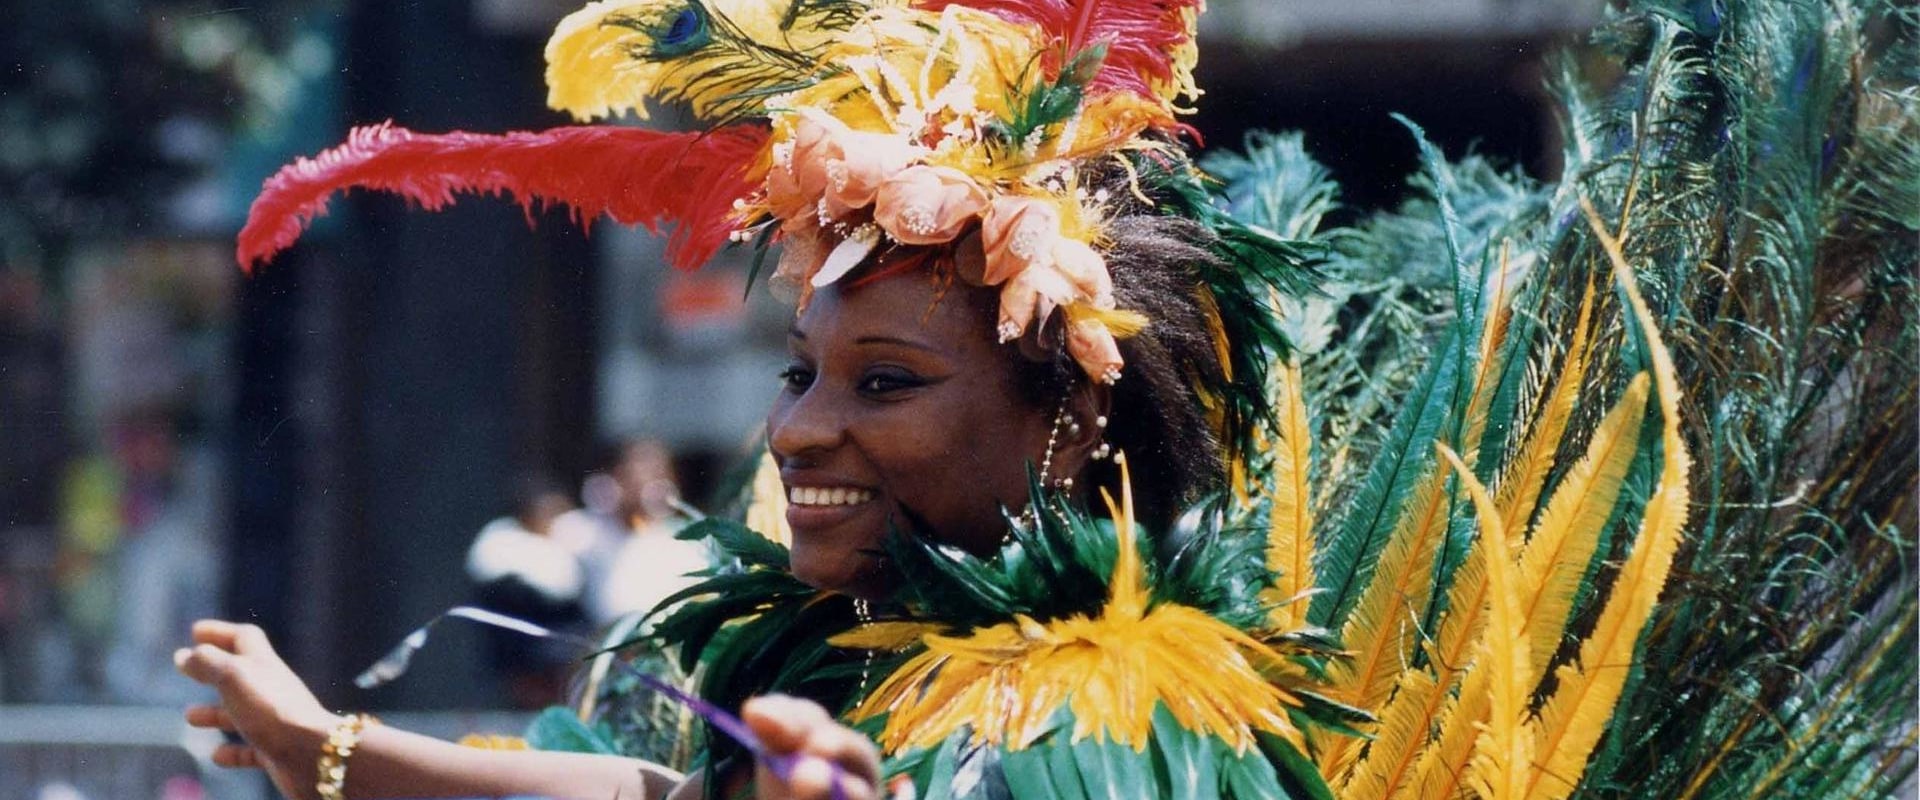 Discover the Rich Culture of Louisiana at its Festivals